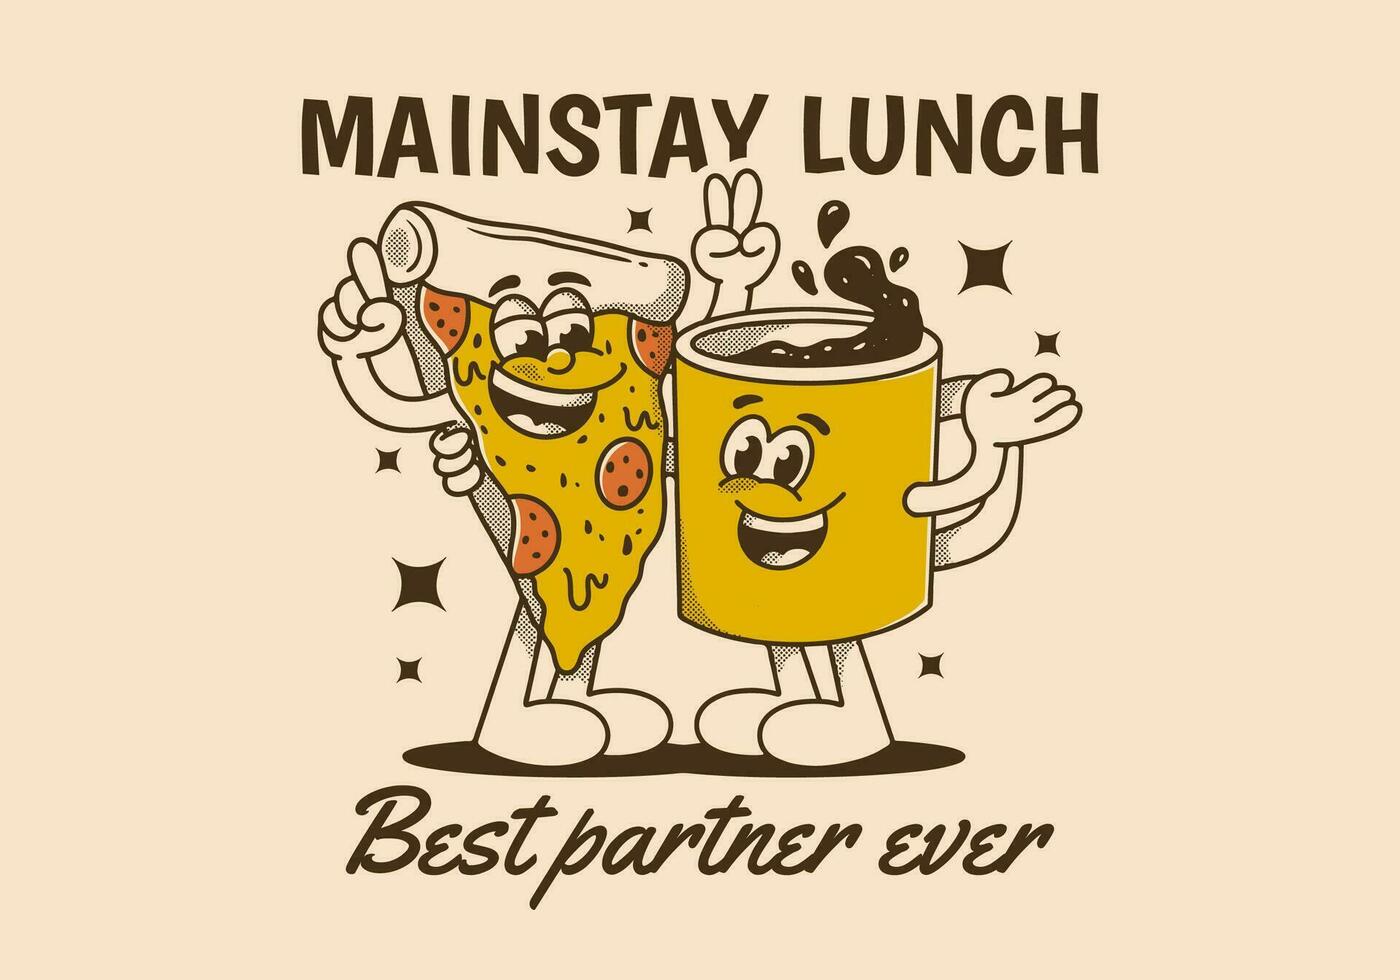 Mainstay lunch, best partner ever. Mascot character of a coffee mug and a slice pizza vector